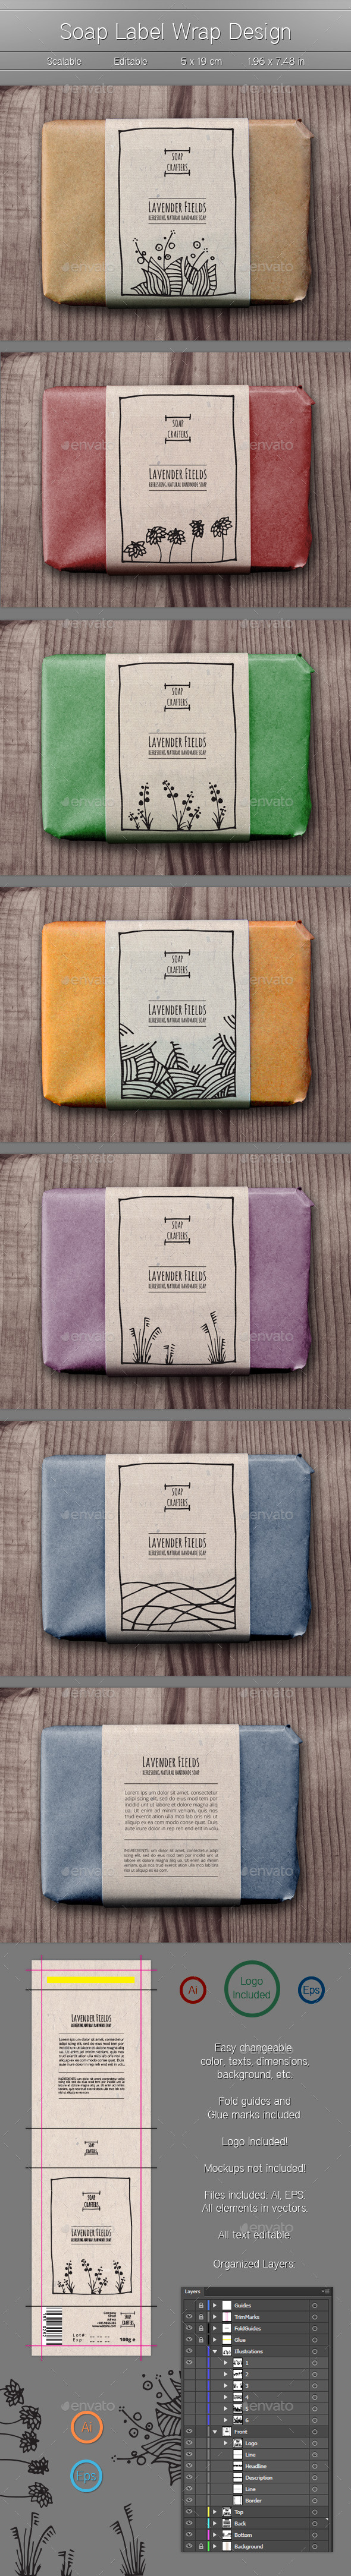 Download Soap Wrap Labels by mihalymm | GraphicRiver